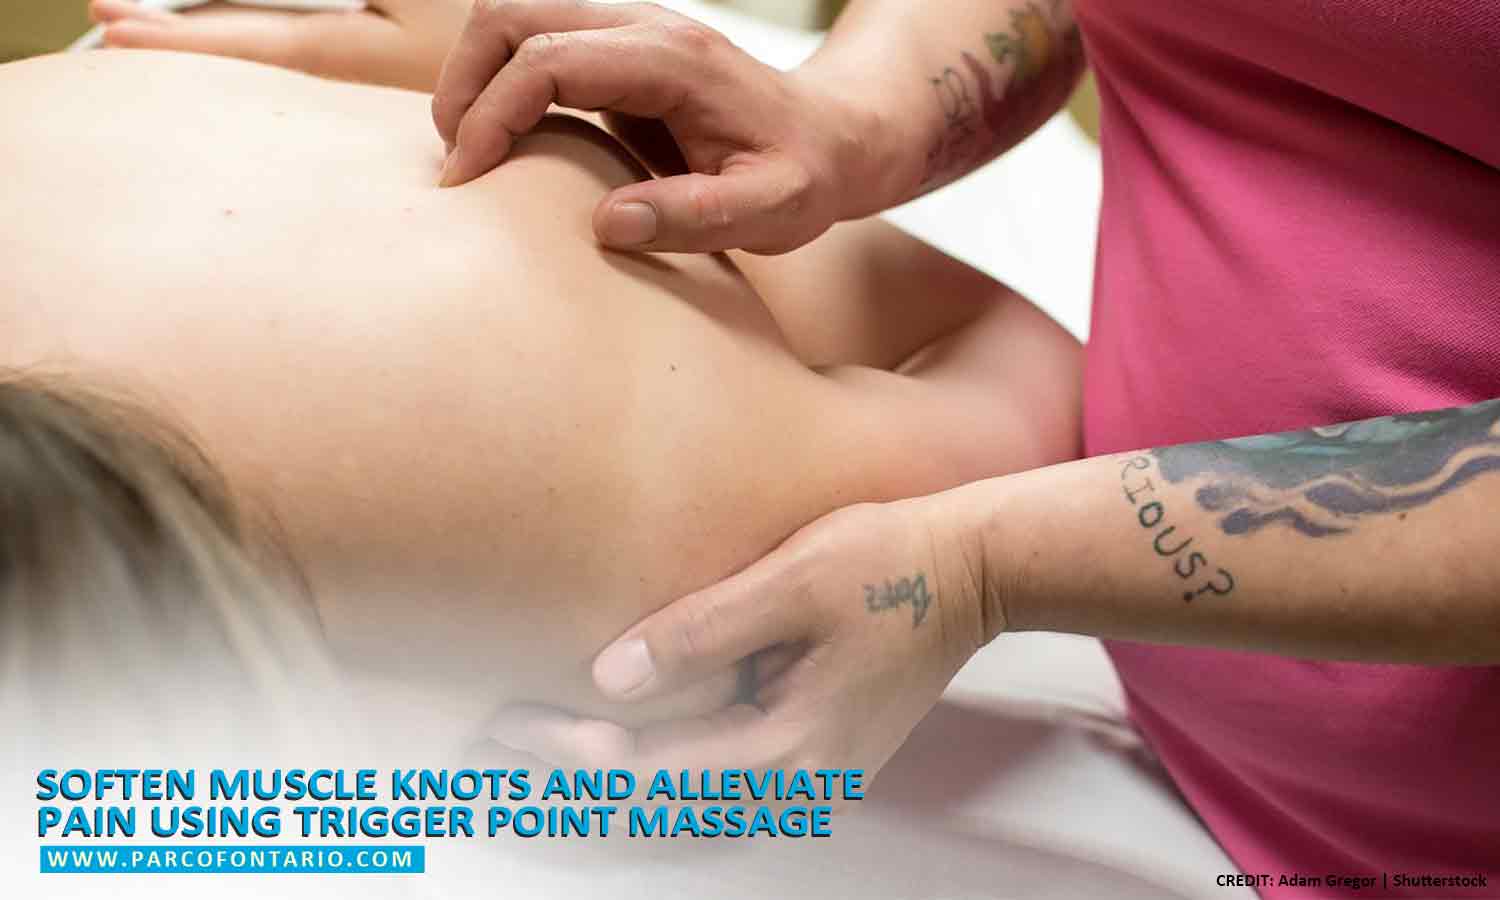 https://www.parcofontario.com/wp-content/uploads/2021/02/Myofascial-massage-is-an-effective-treatment-for-fibromyalgia-and-chronic-fatigue.jpg